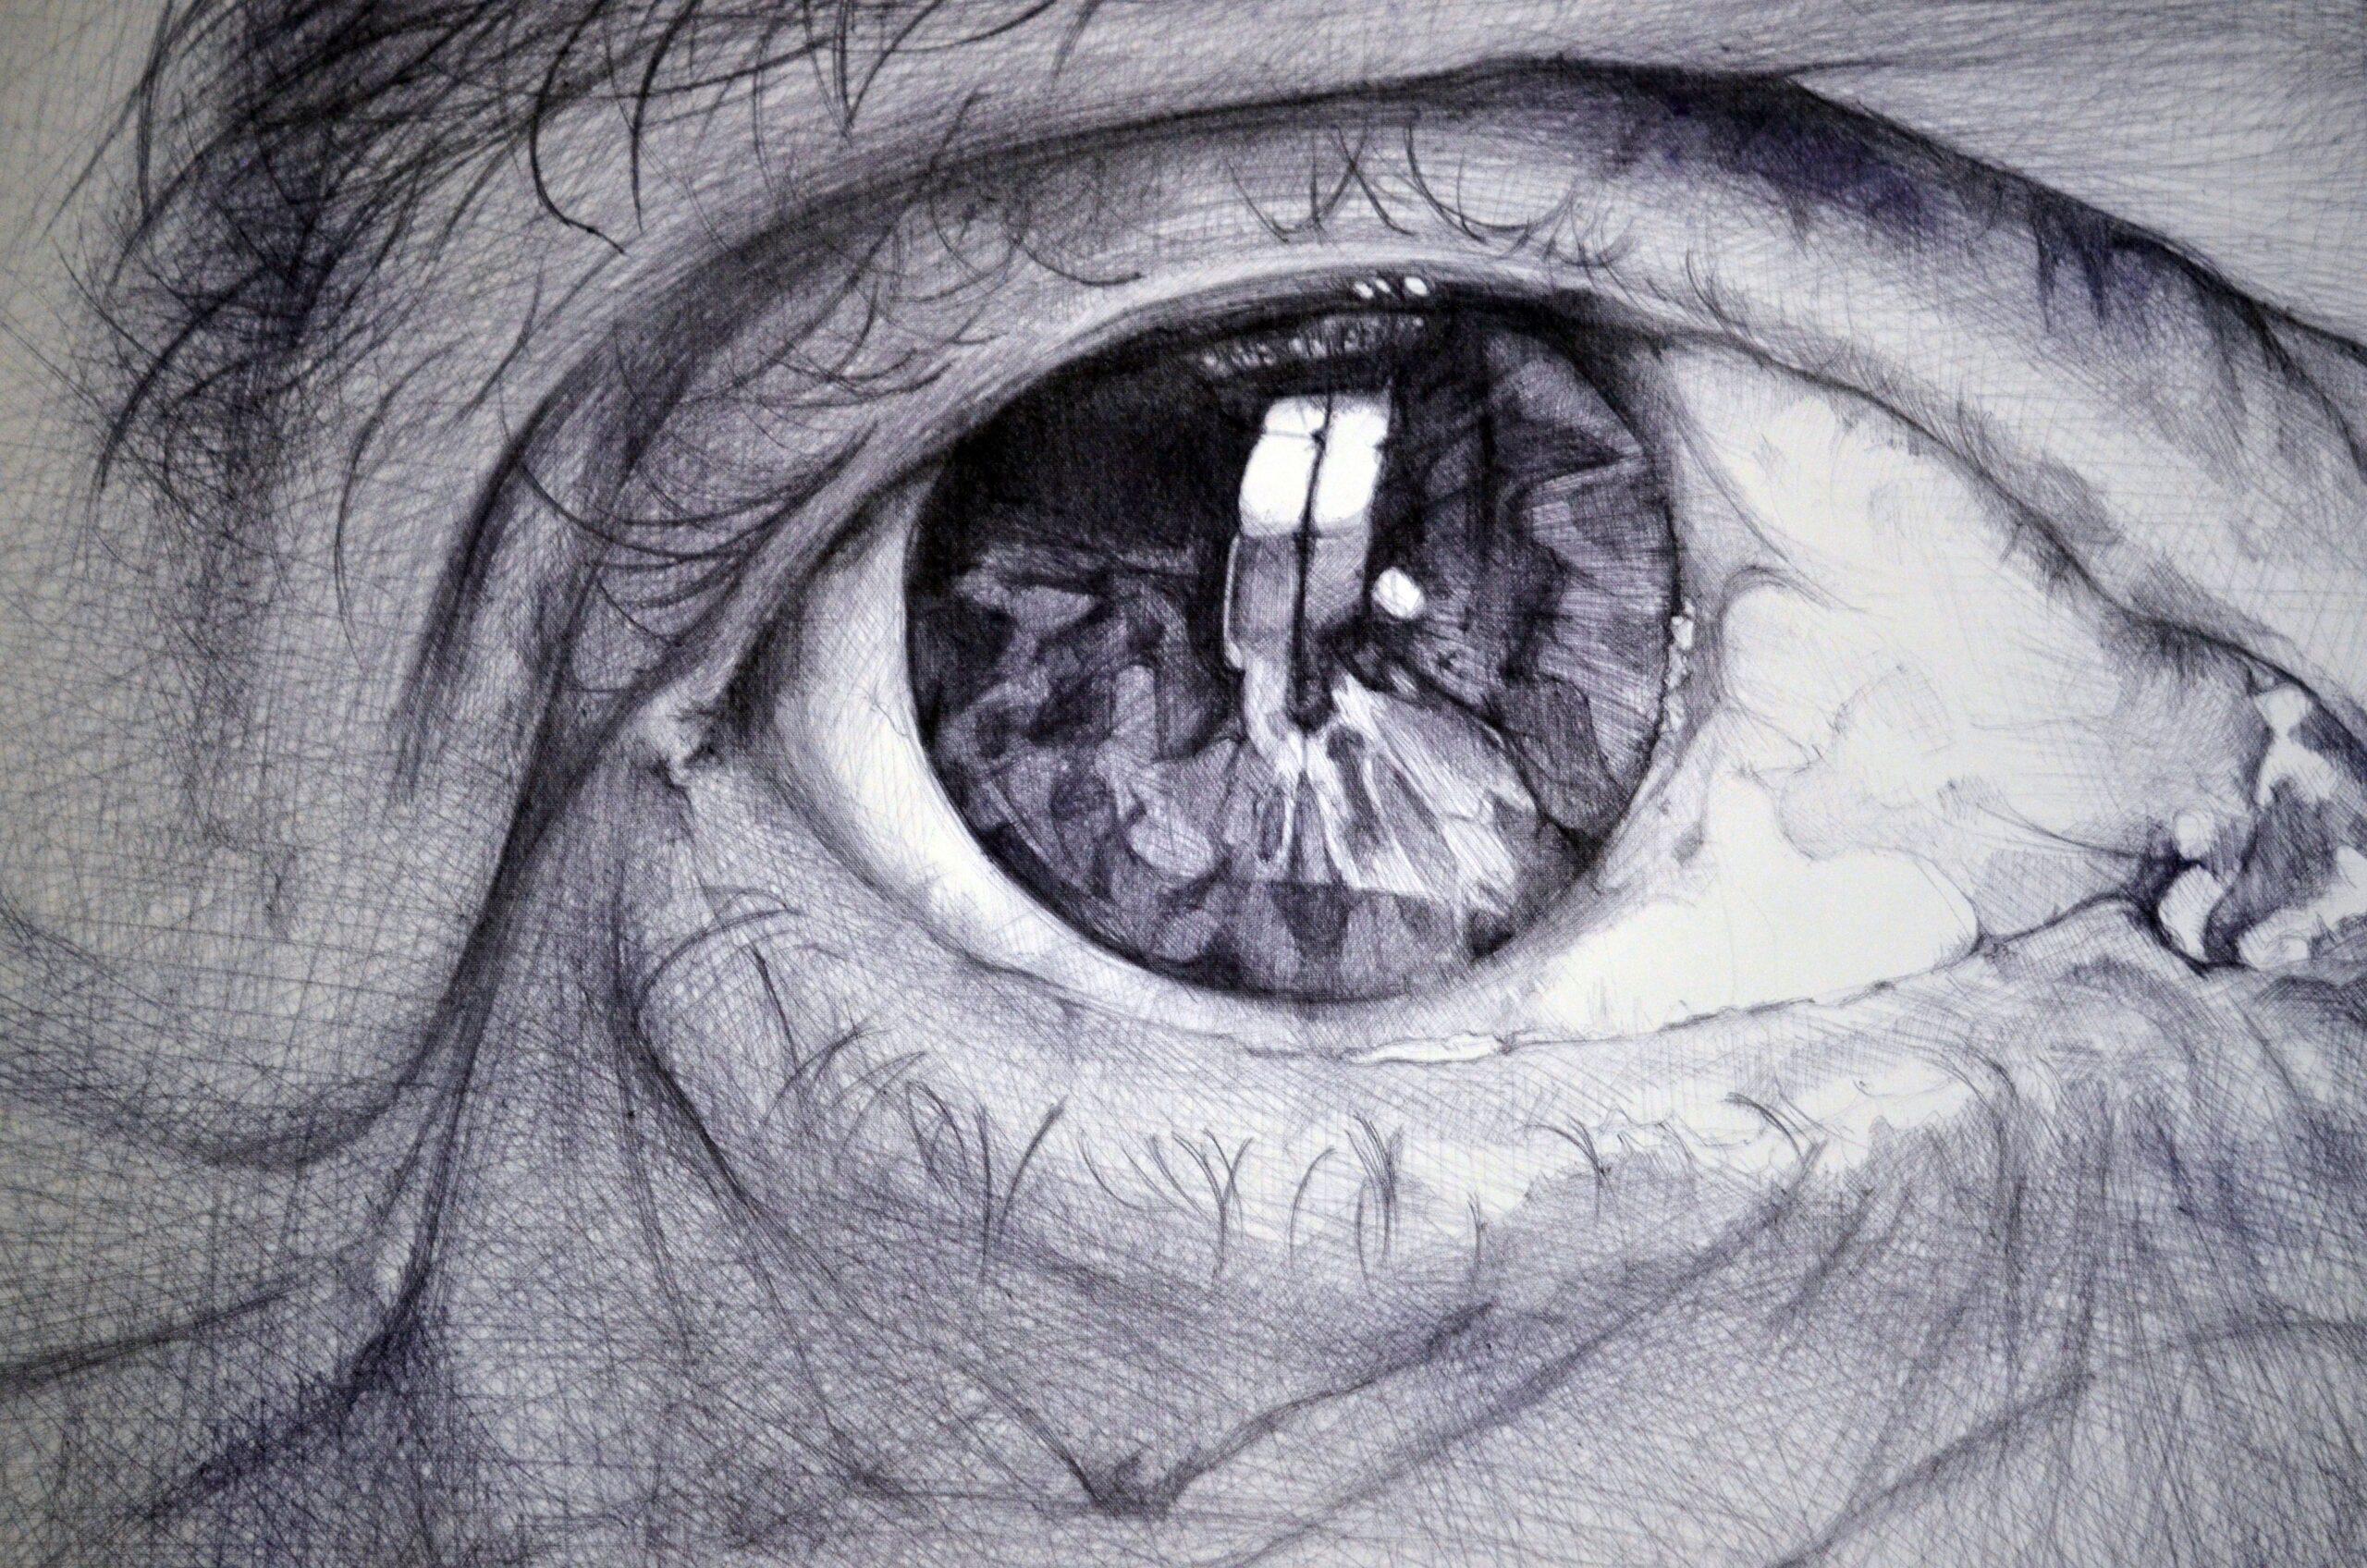 Luigi Pietro by Cécile Bisciglia - Ballpoint pen drawing on canvas, eyes, grey For Sale 1